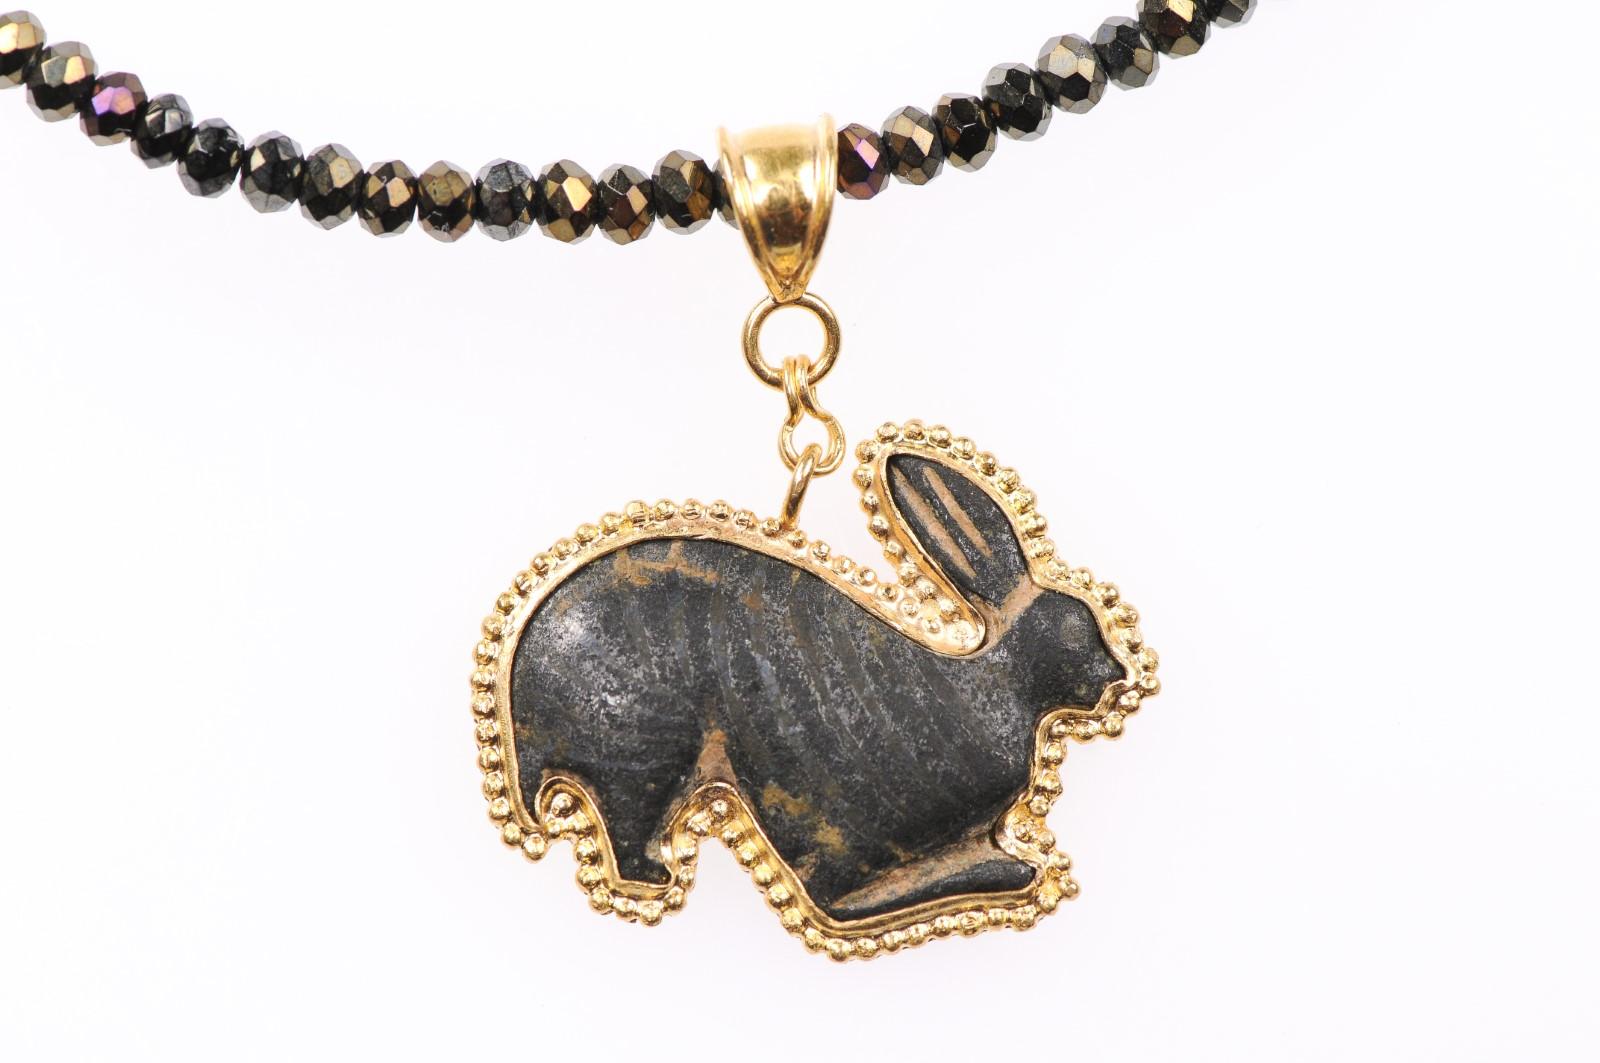 An authentic Roman bronze rabbit fragment (circa 1st-3rd century AD), with the contemporary addition of the 21-karat gold bezel. This ancient bunny in bronze has the sweetest set of ears and a beautiful dark patina, set within a custom 21-karat